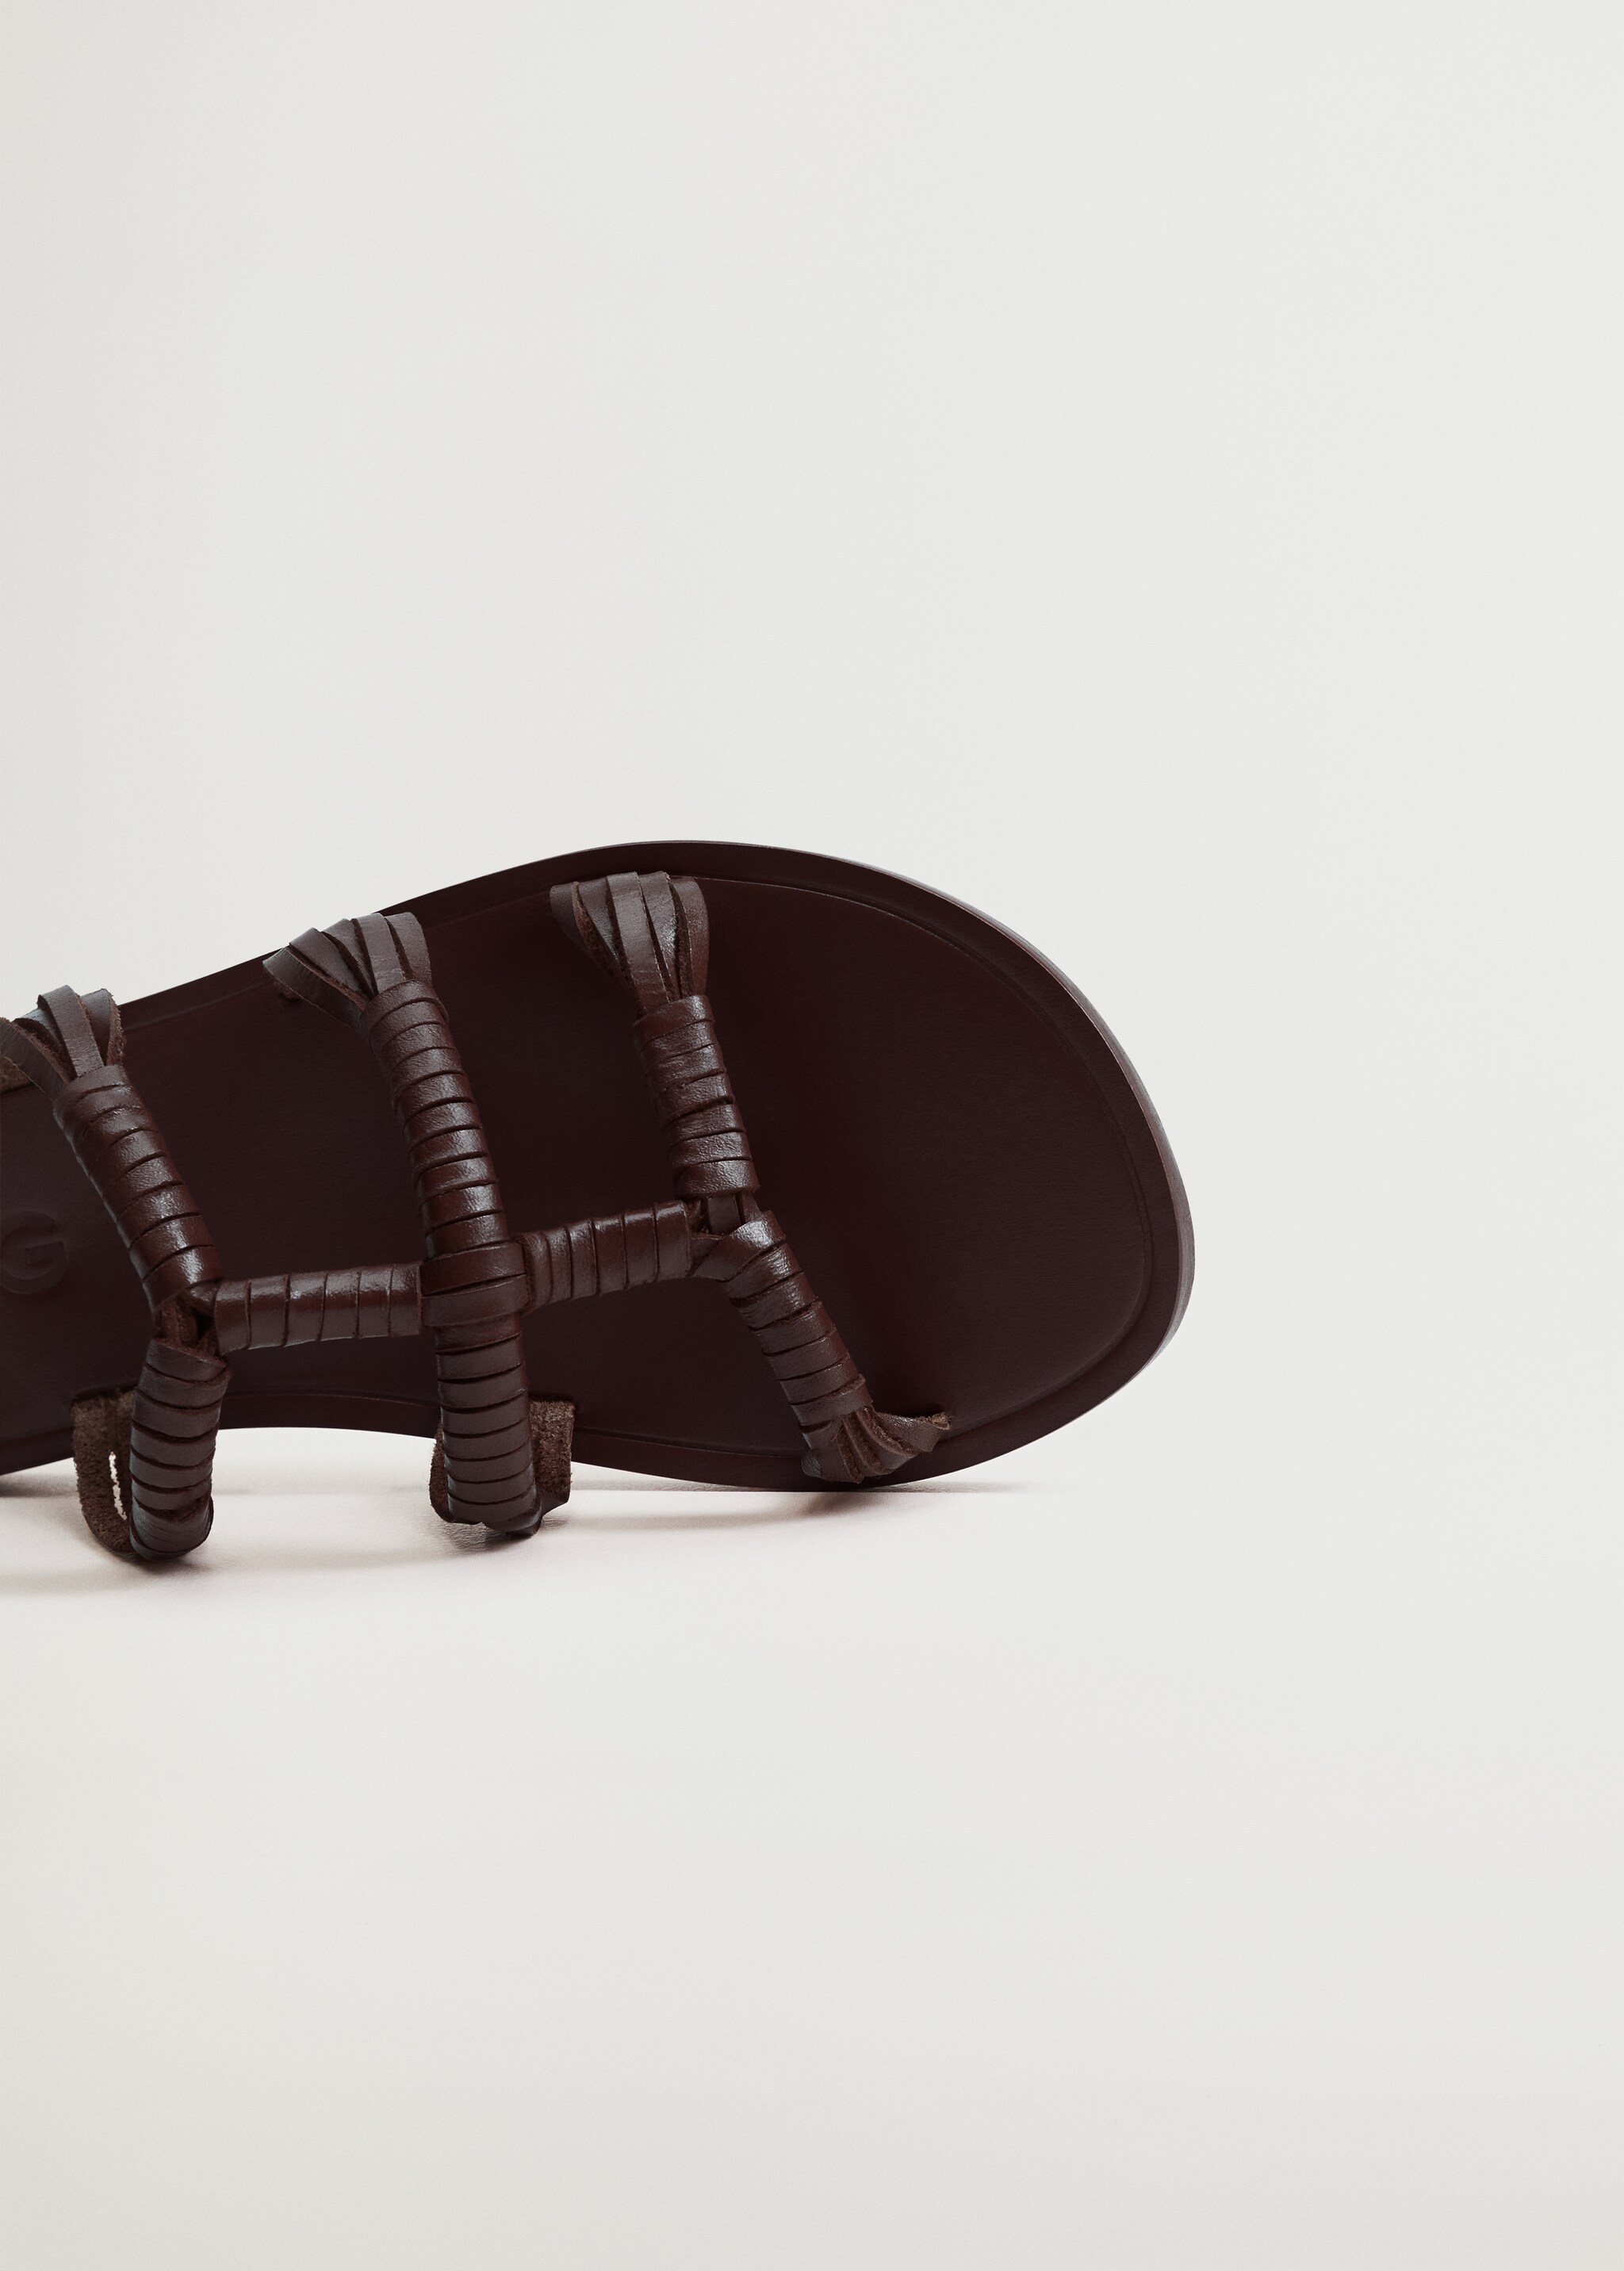 Leather straps sandals - Details of the article 3